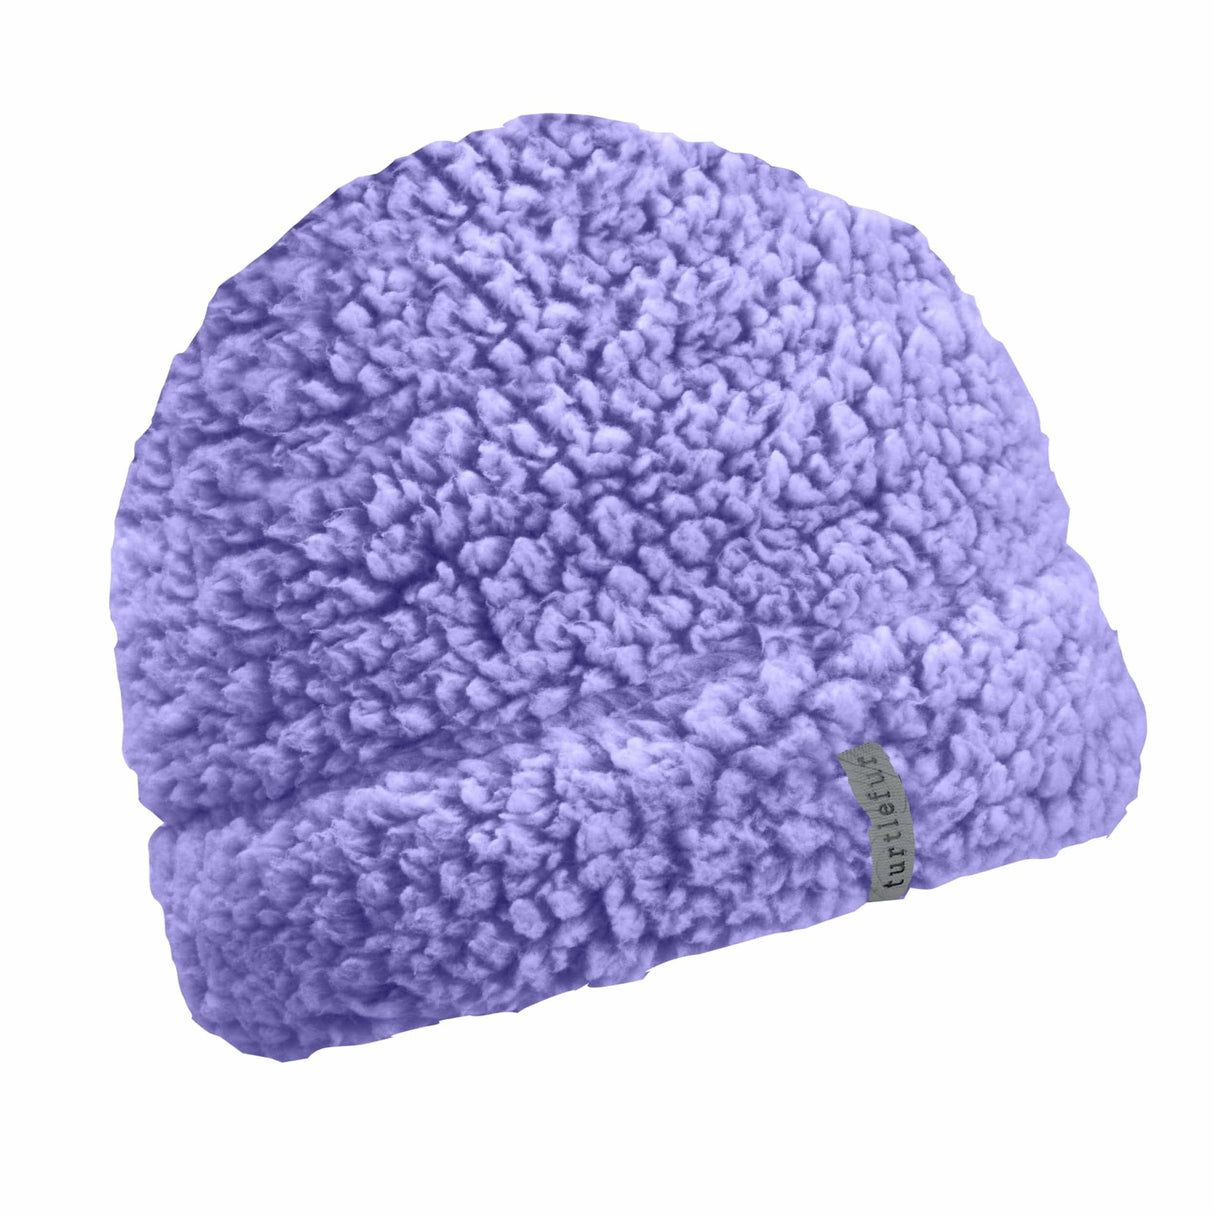 Turtle Fur Comfort Lush Beanie  -  One Size Fits Most / Violet